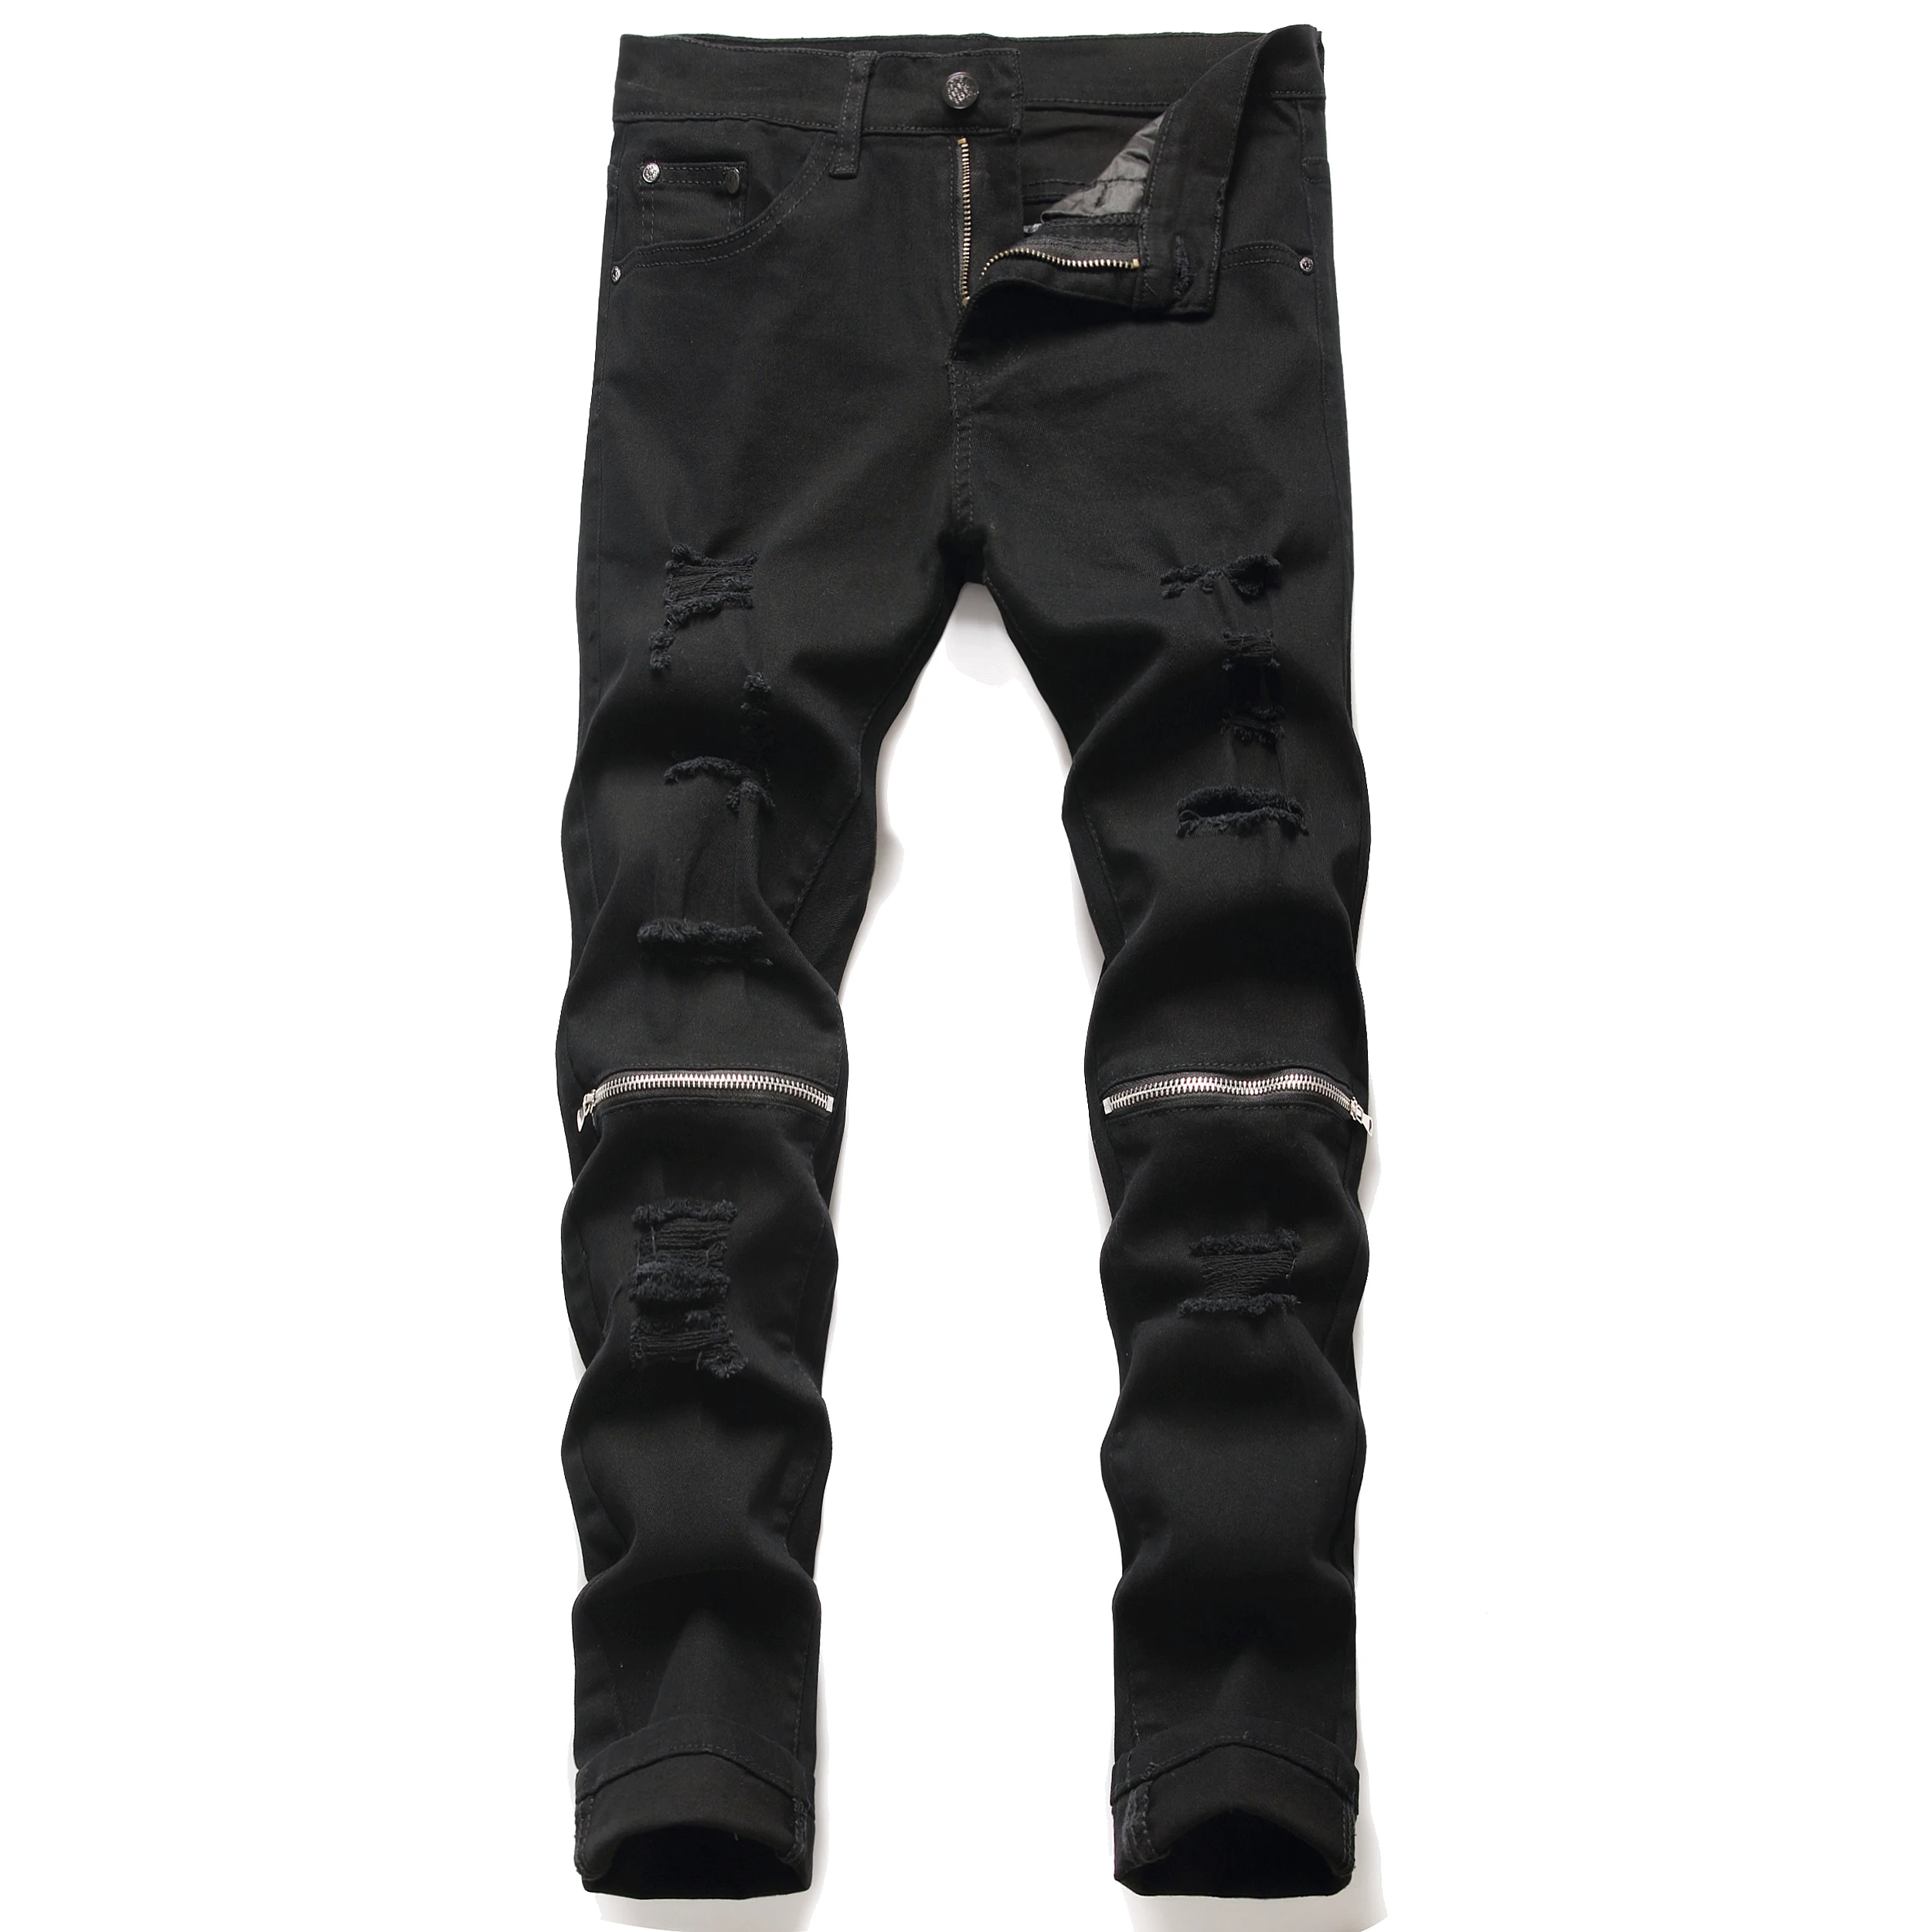 

2022 Male Jeans Black Pants With Knee Zipper Hole Biker Jeans Men Brand Slim Straight Destroyed Torn Jean Pants For Male Homme, Customized color